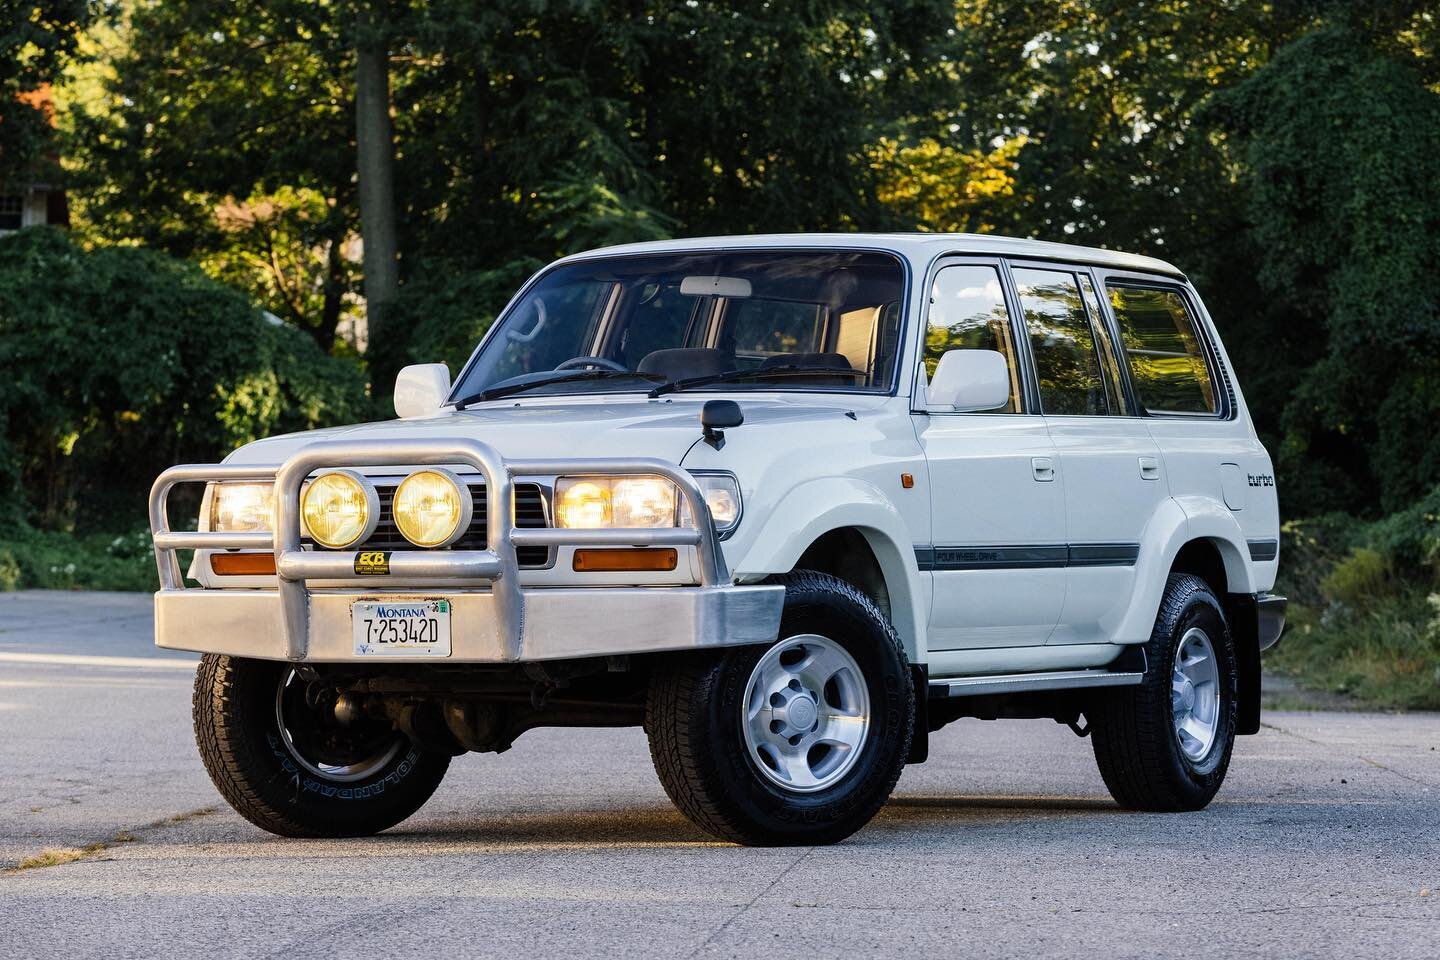 Now live on Bring a Trailer 
1995 Toyota Land Cruiser HDJ81 183,925 miles (~296,000 KM)
White over gray cloth upholstery 
4.2L 24-valve 1HD-FT Turbo Diesel inline-six 
Five-speed manual transmission 
Locking front, center, and rear differentials
Fold